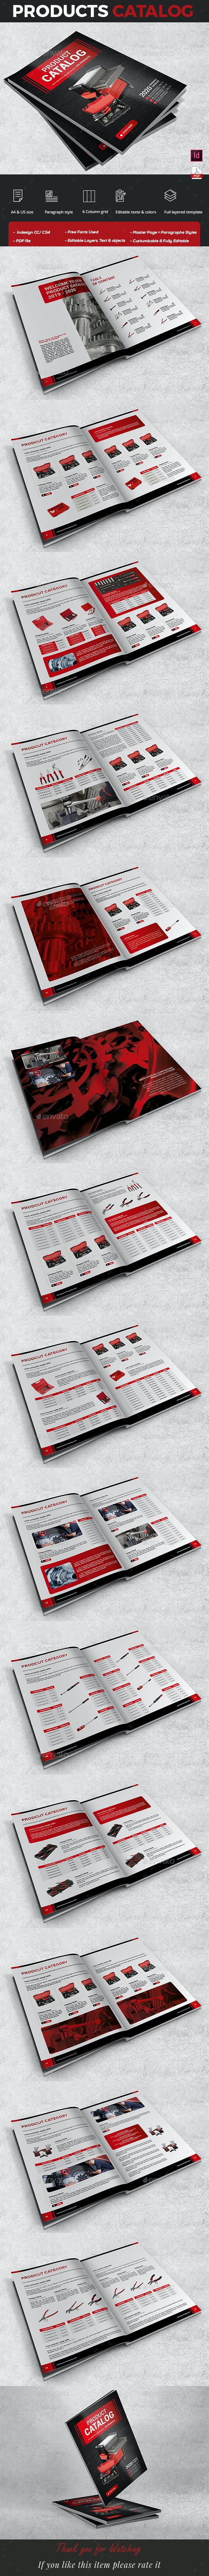 industrial catalog template